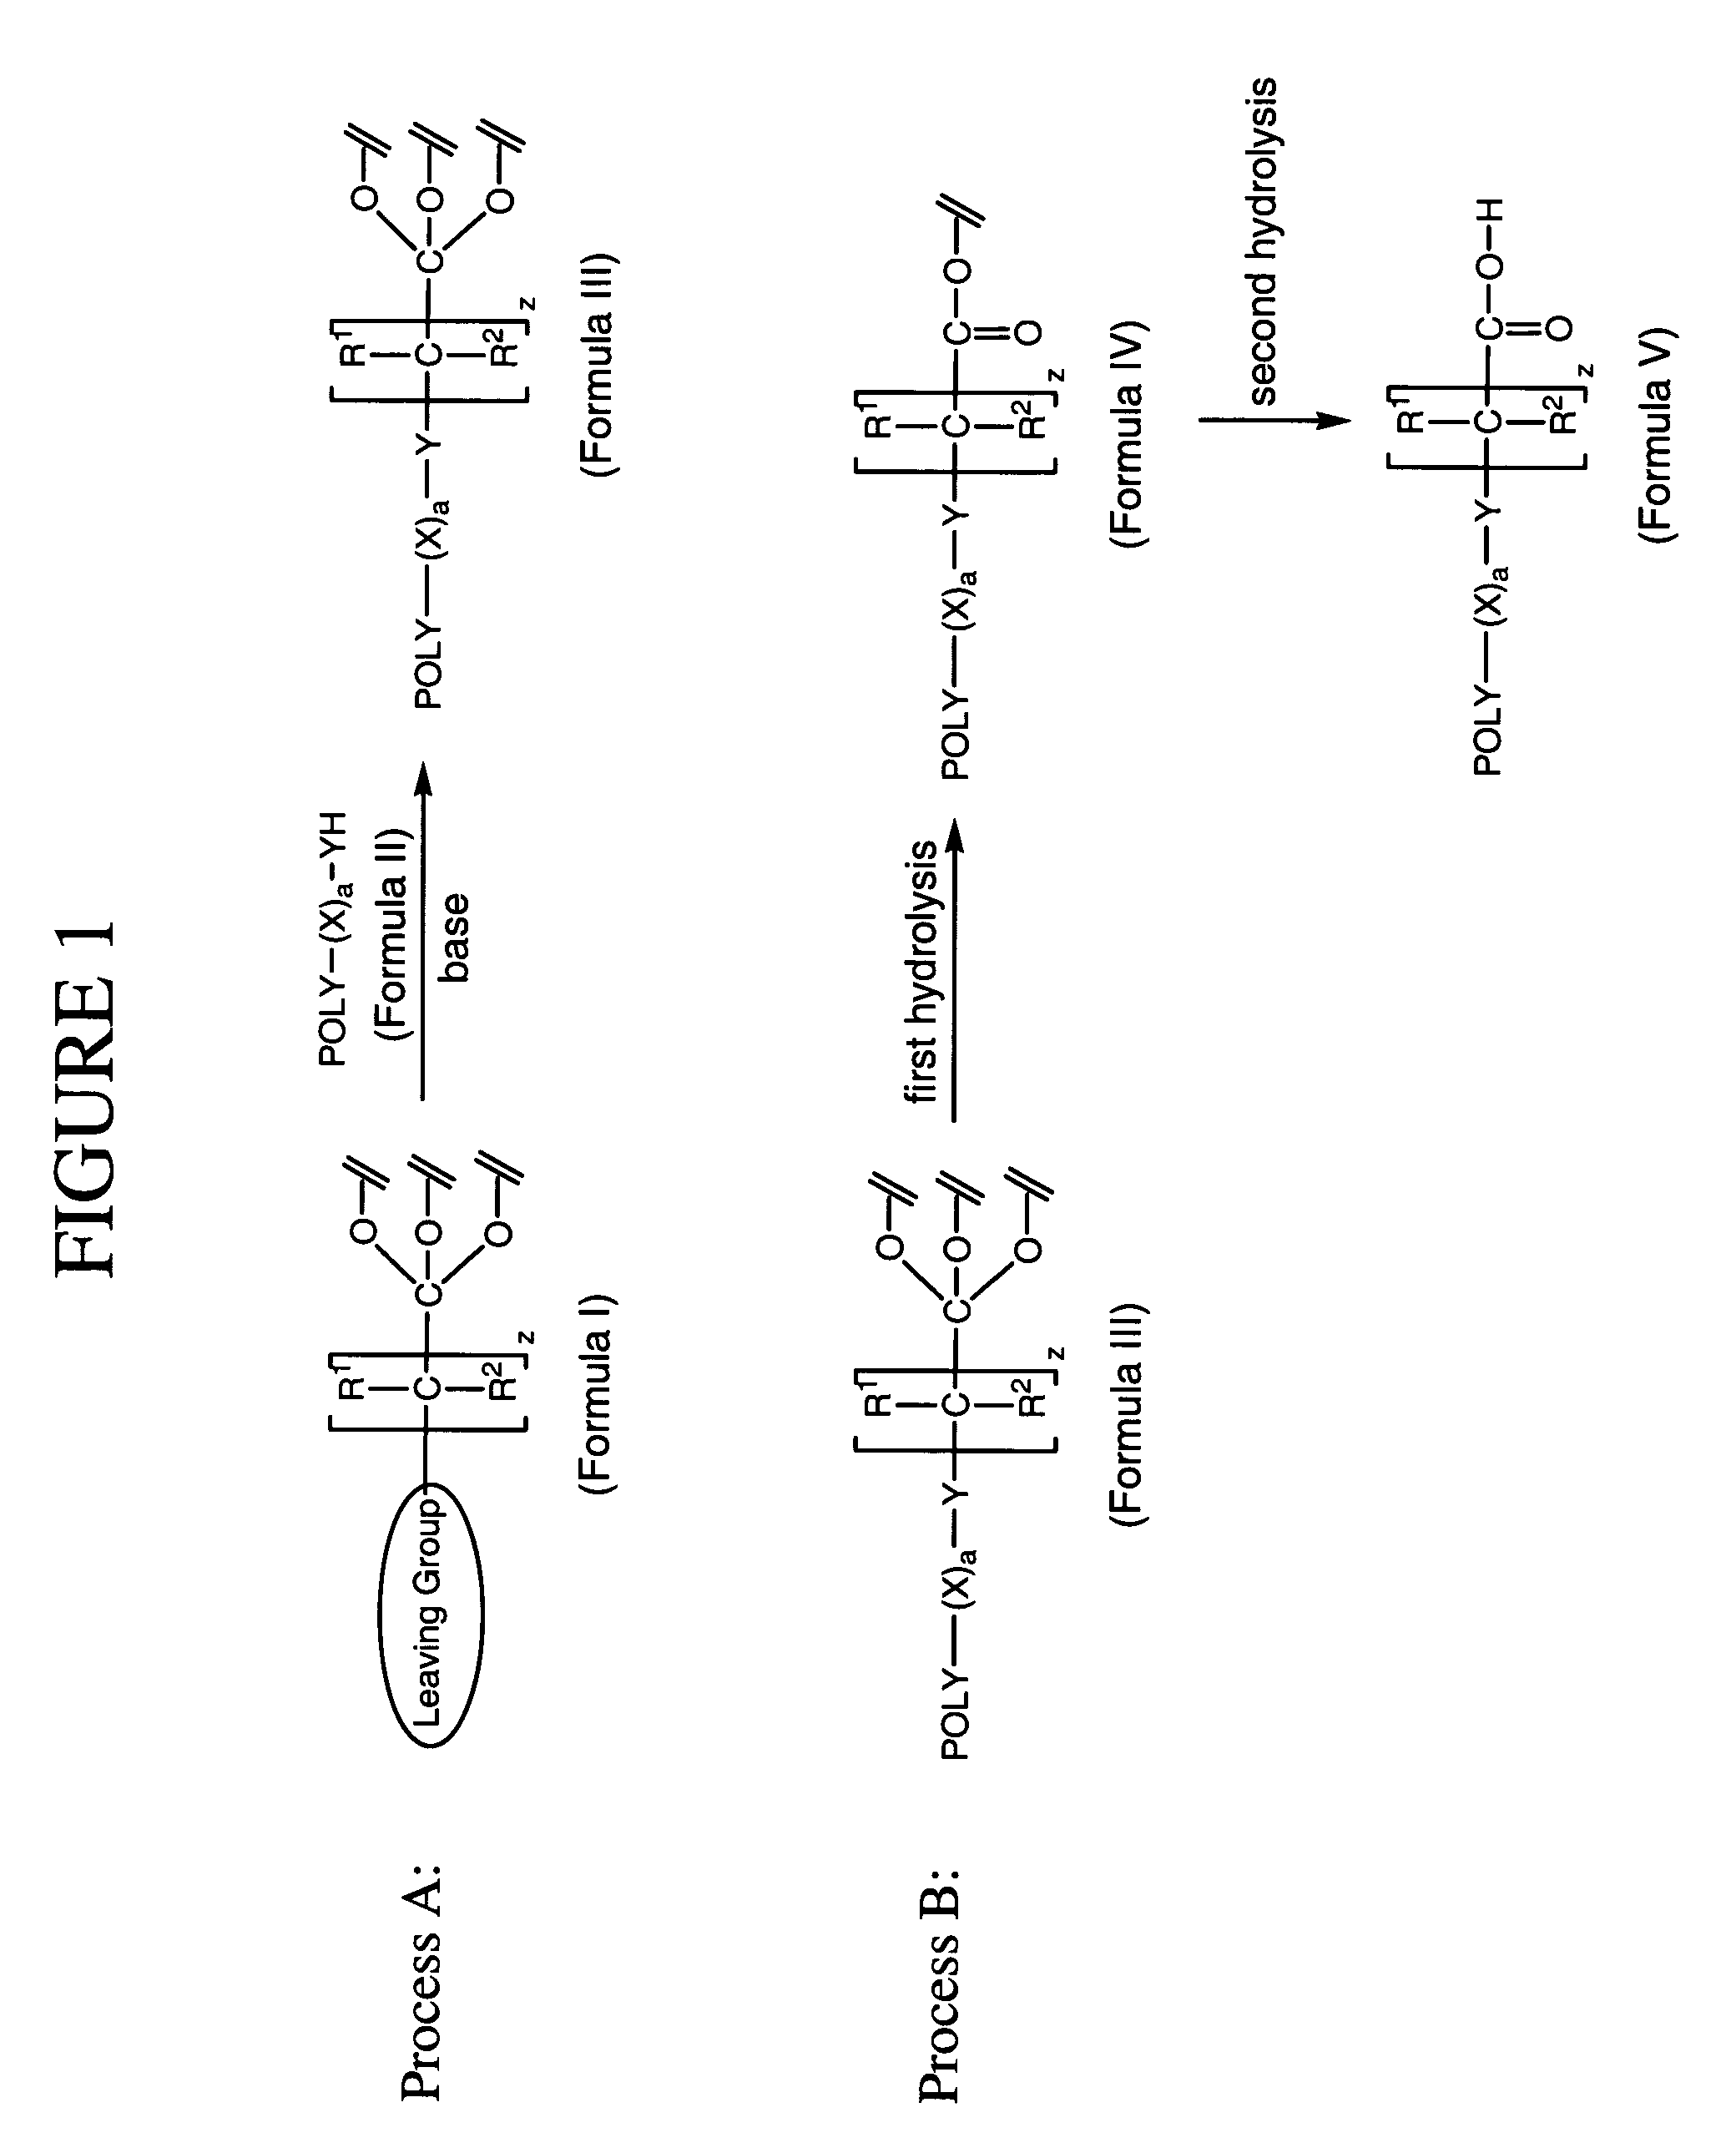 Method for preparing water-soluble polymer derivatives bearing a terminal carboxylic acid